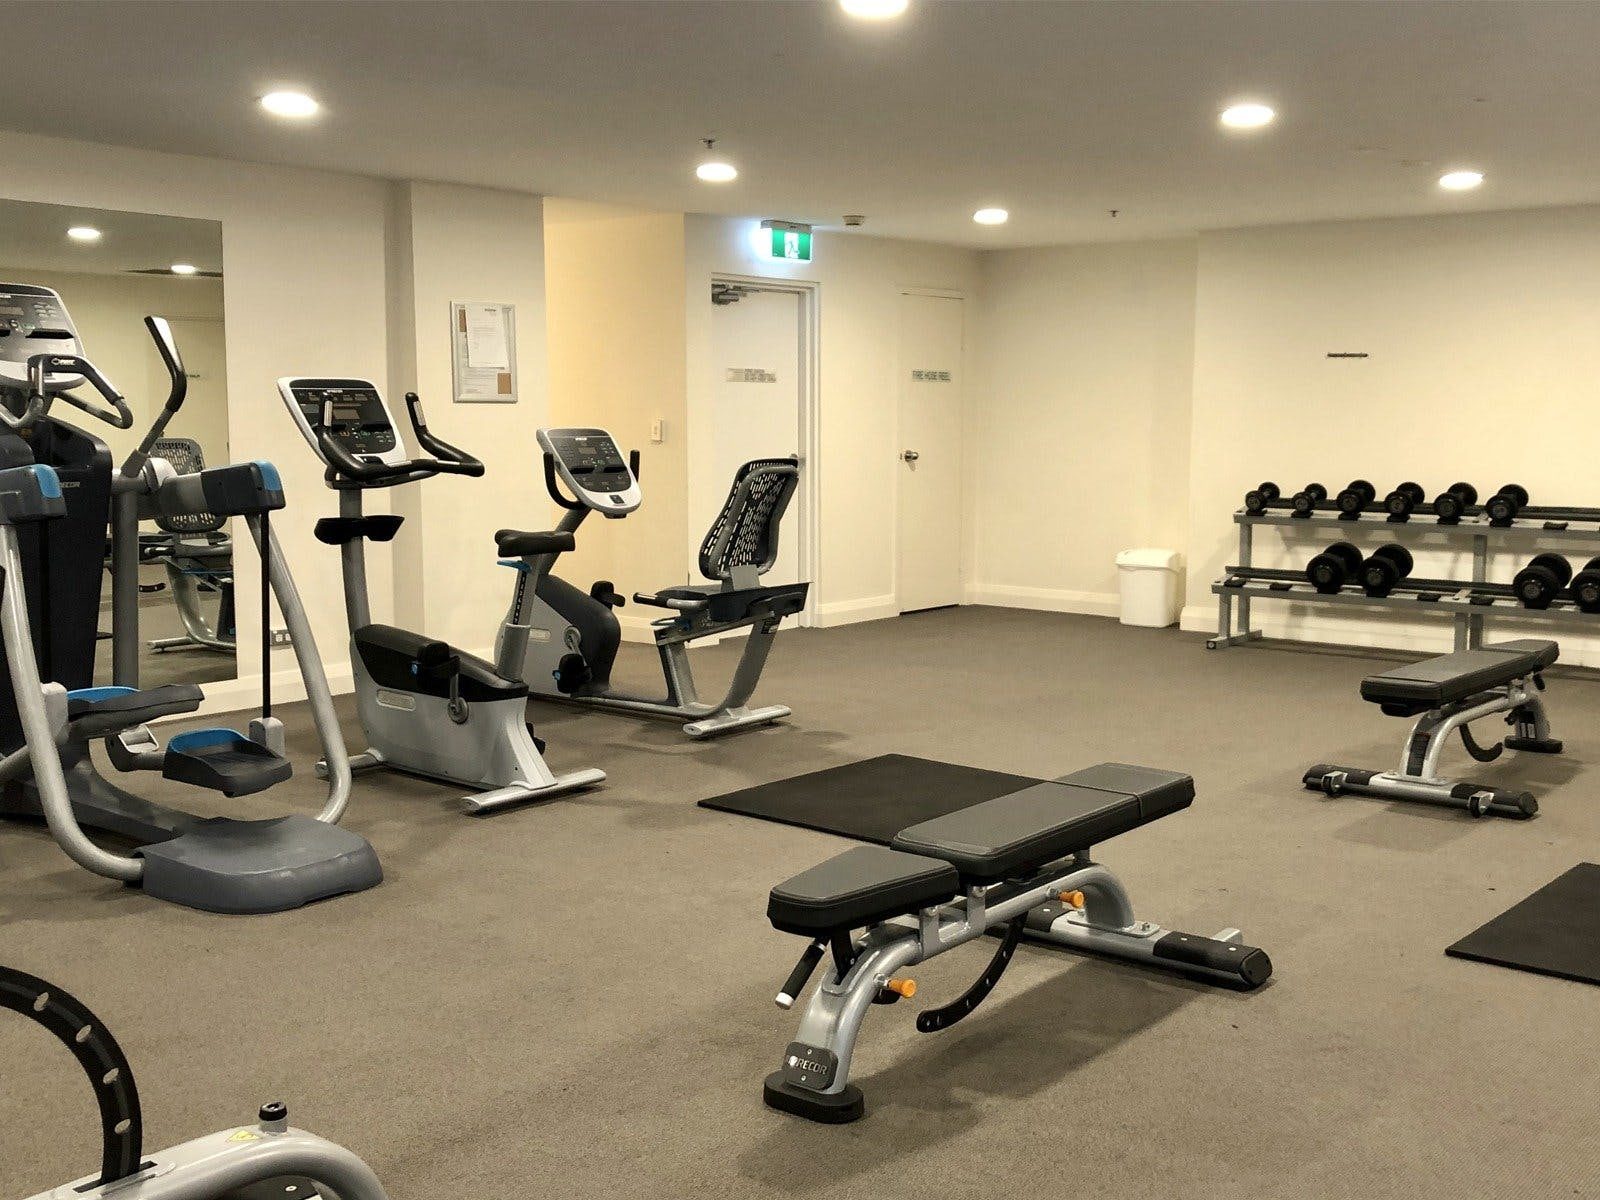 Gym access to all guests included in the rate offered